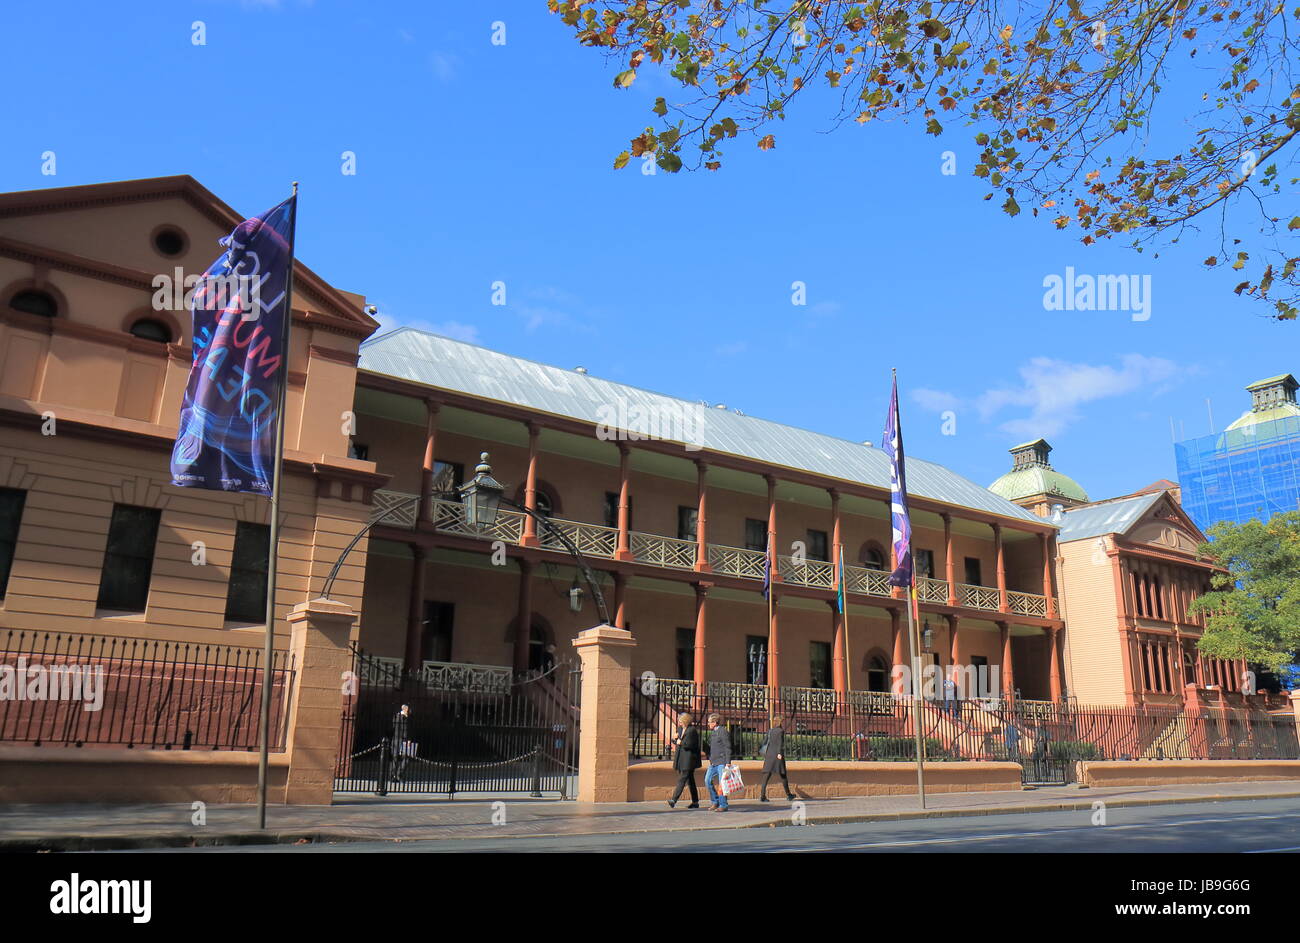 People visit NSW Parliament house in Sydney Australia. Stock Photo